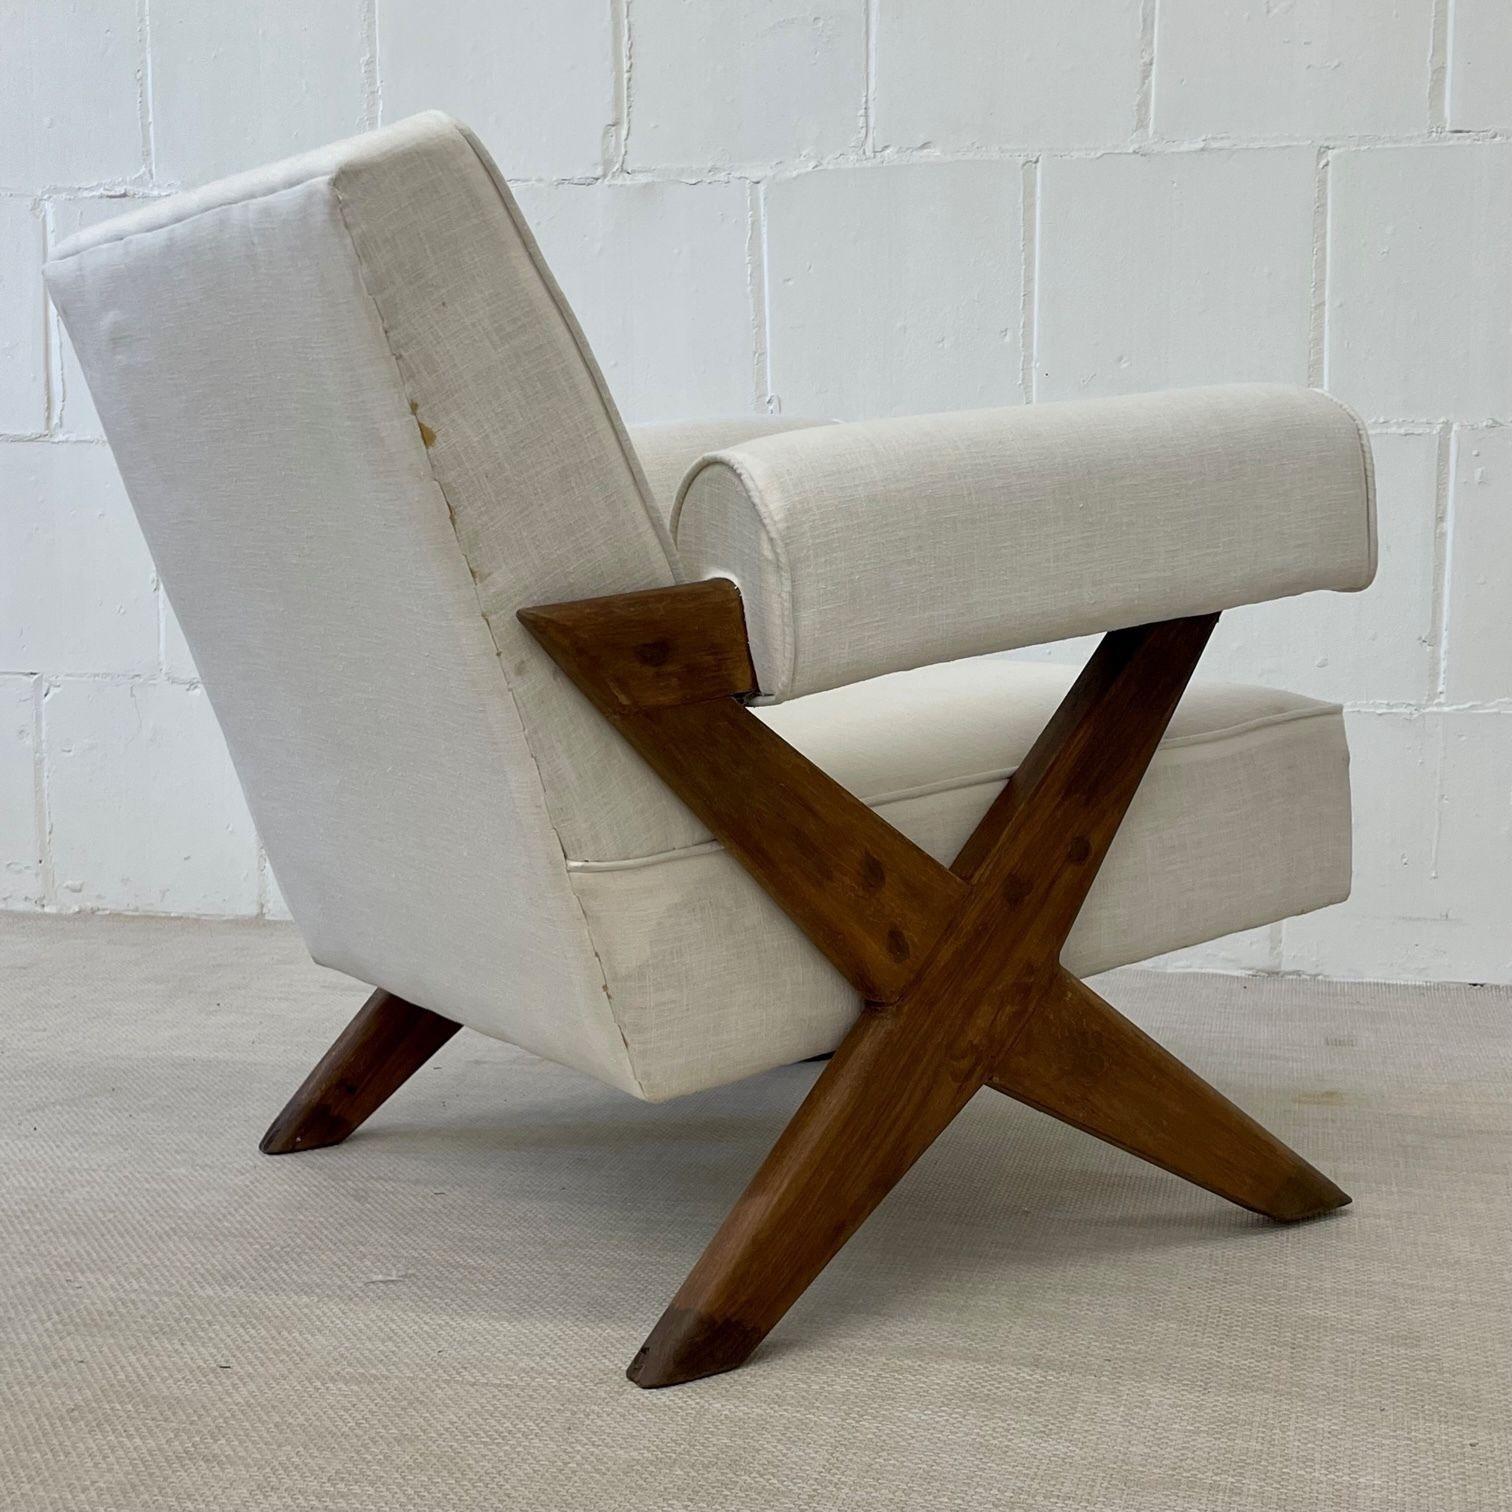 Linen Pierre Jeanneret, French Mid-Century Modern, Lounge Chairs, Chandigarh, 1960s For Sale